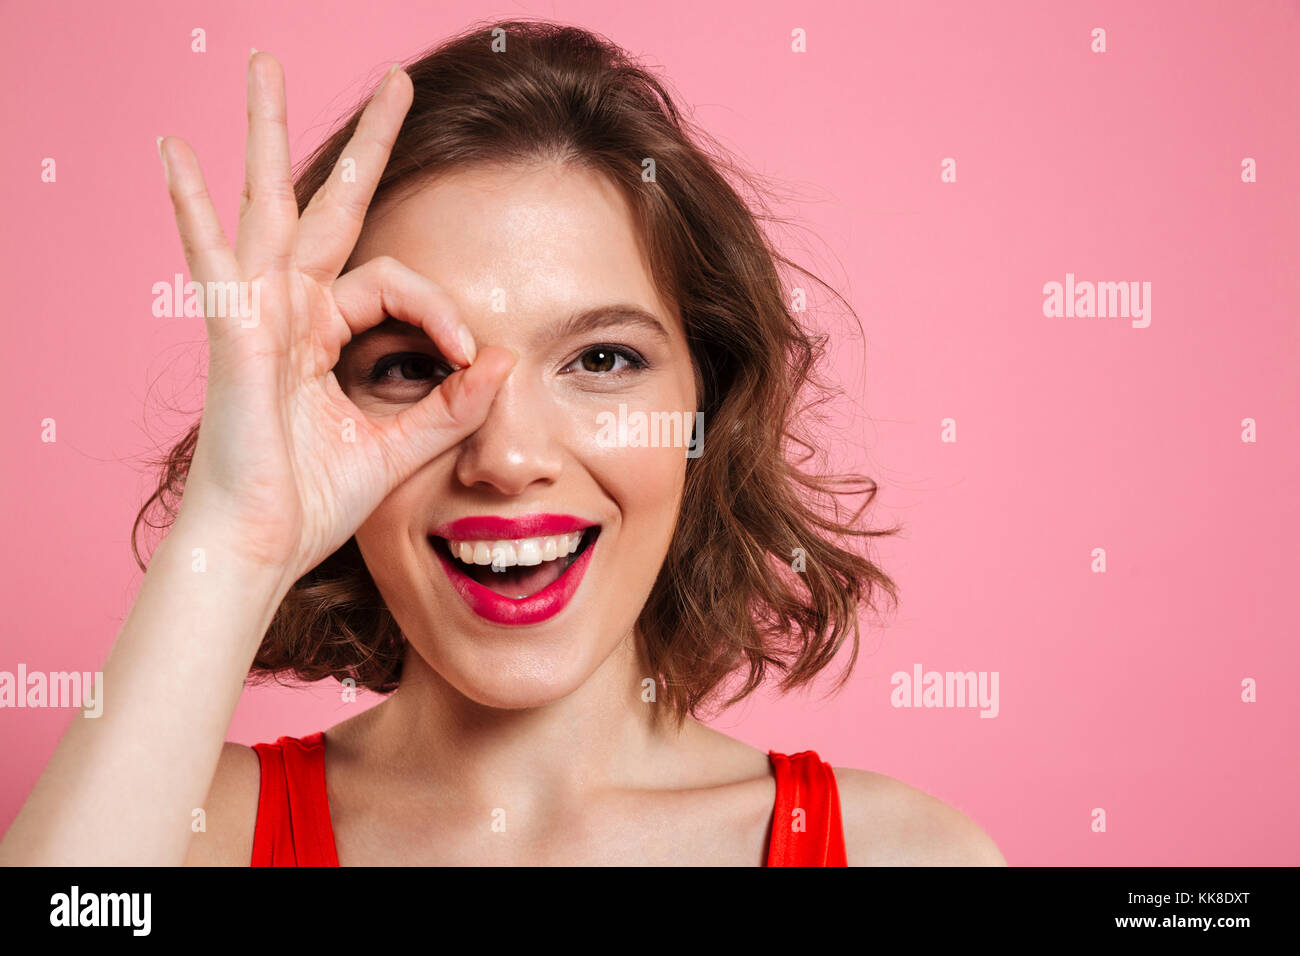 Close-up portrait of young happy girl with red lips looking at camera par OK sign, isolé sur fond rose Banque D'Images